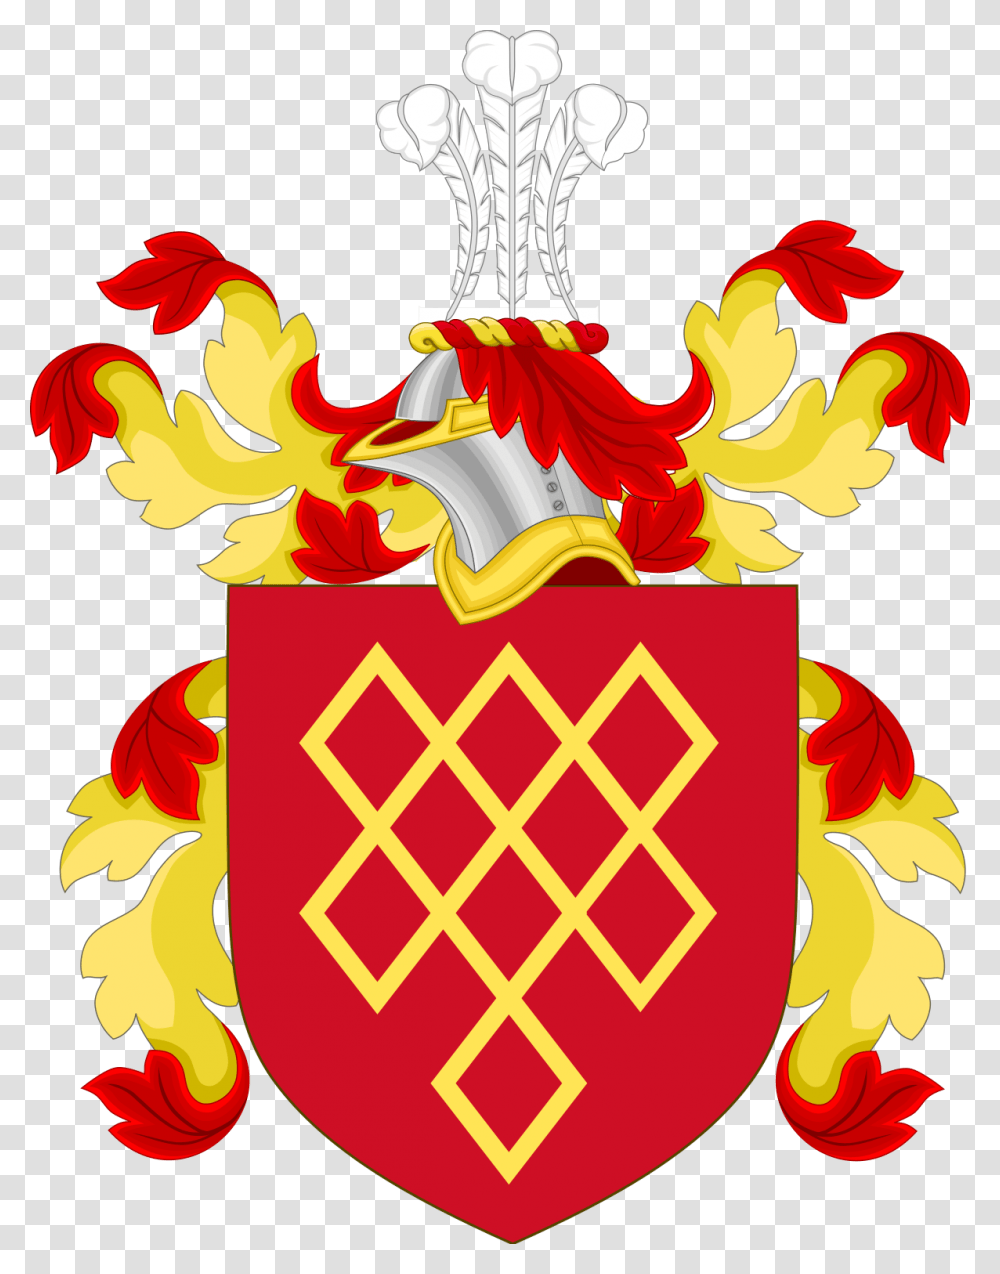 Prince Of Wales's Feathers, Fire Transparent Png